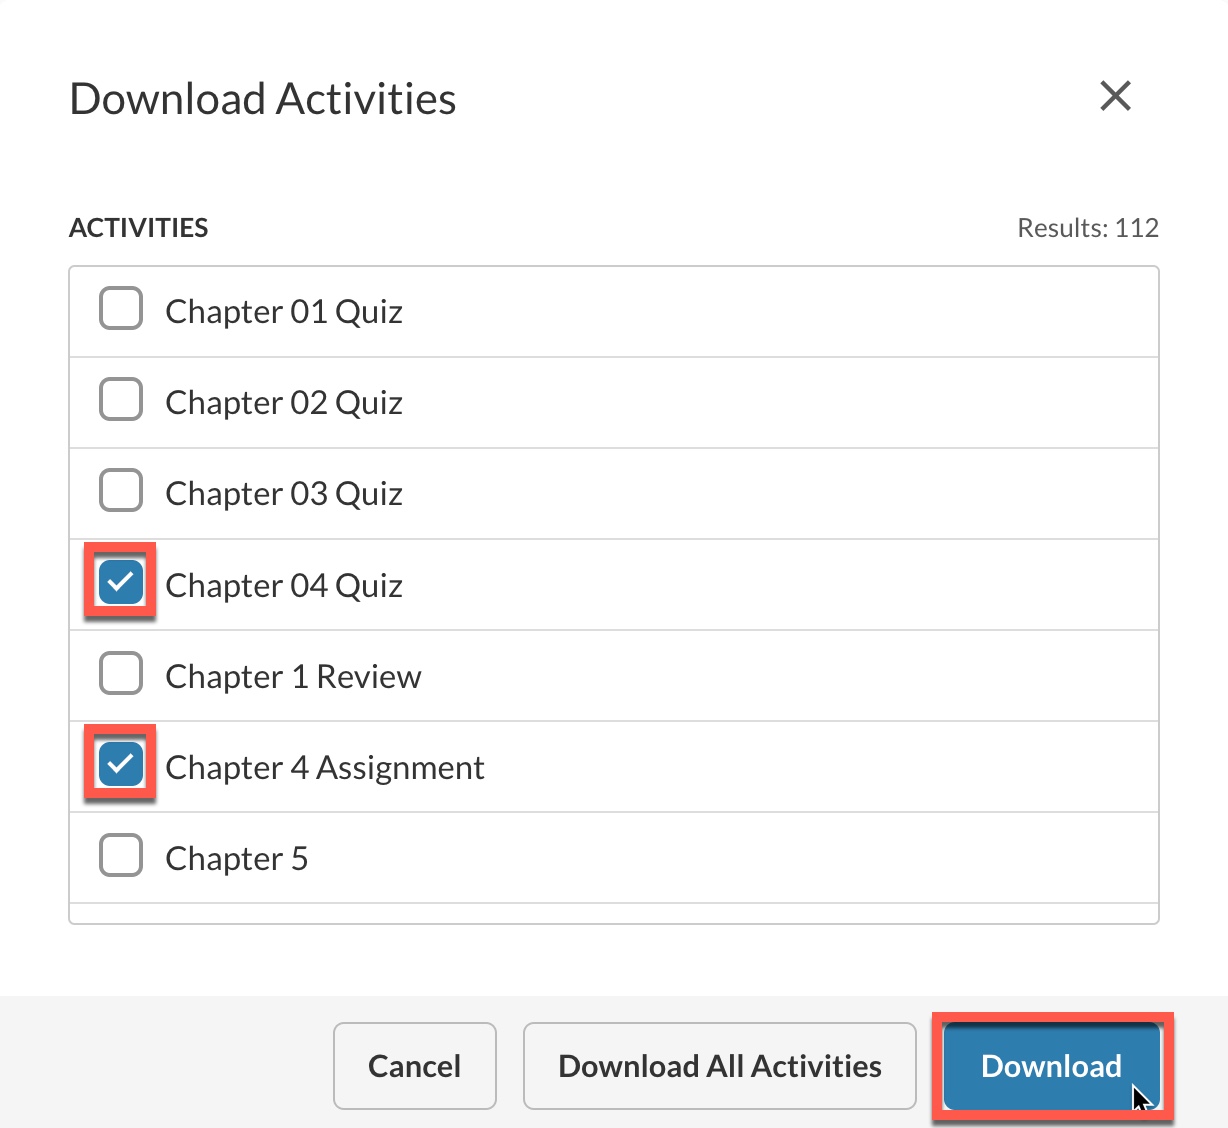 more options menu with activities selected and download button highlighted